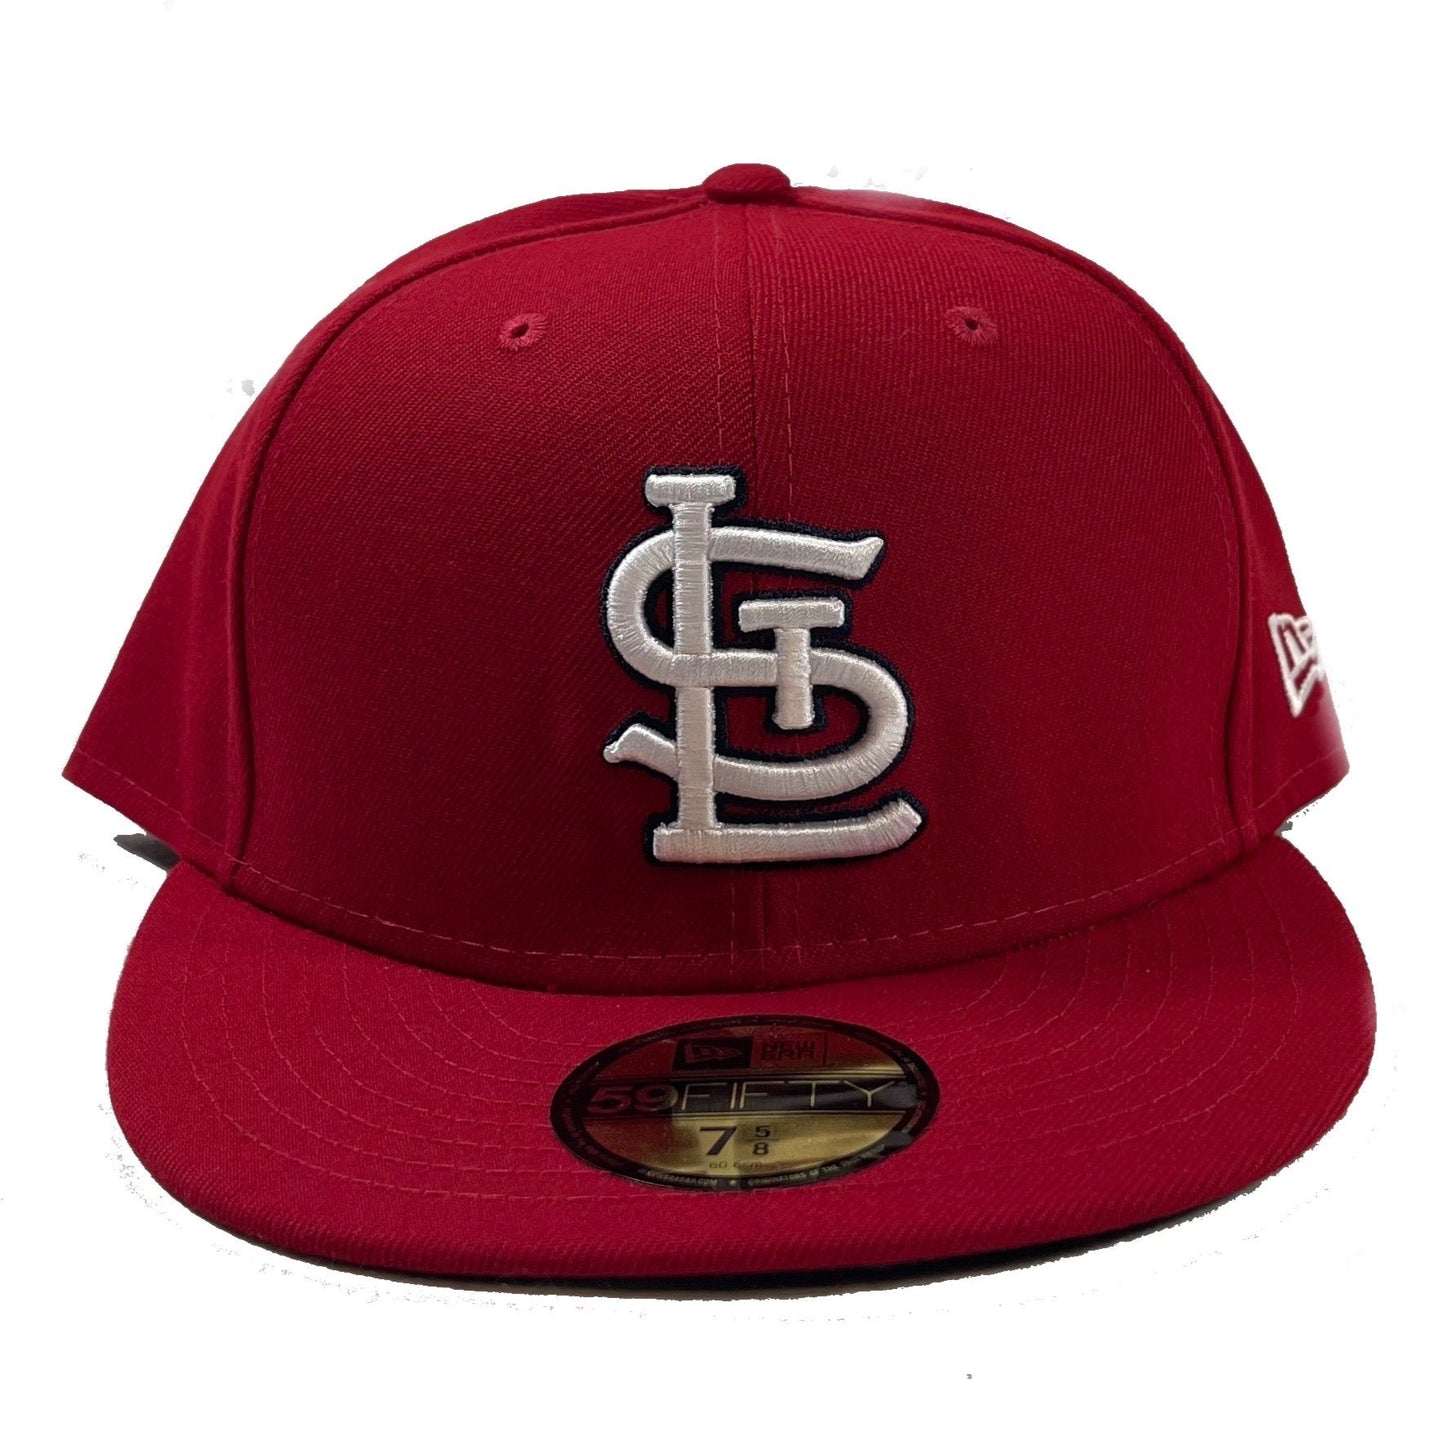 St. Louis Cardinals (Red) Fitted